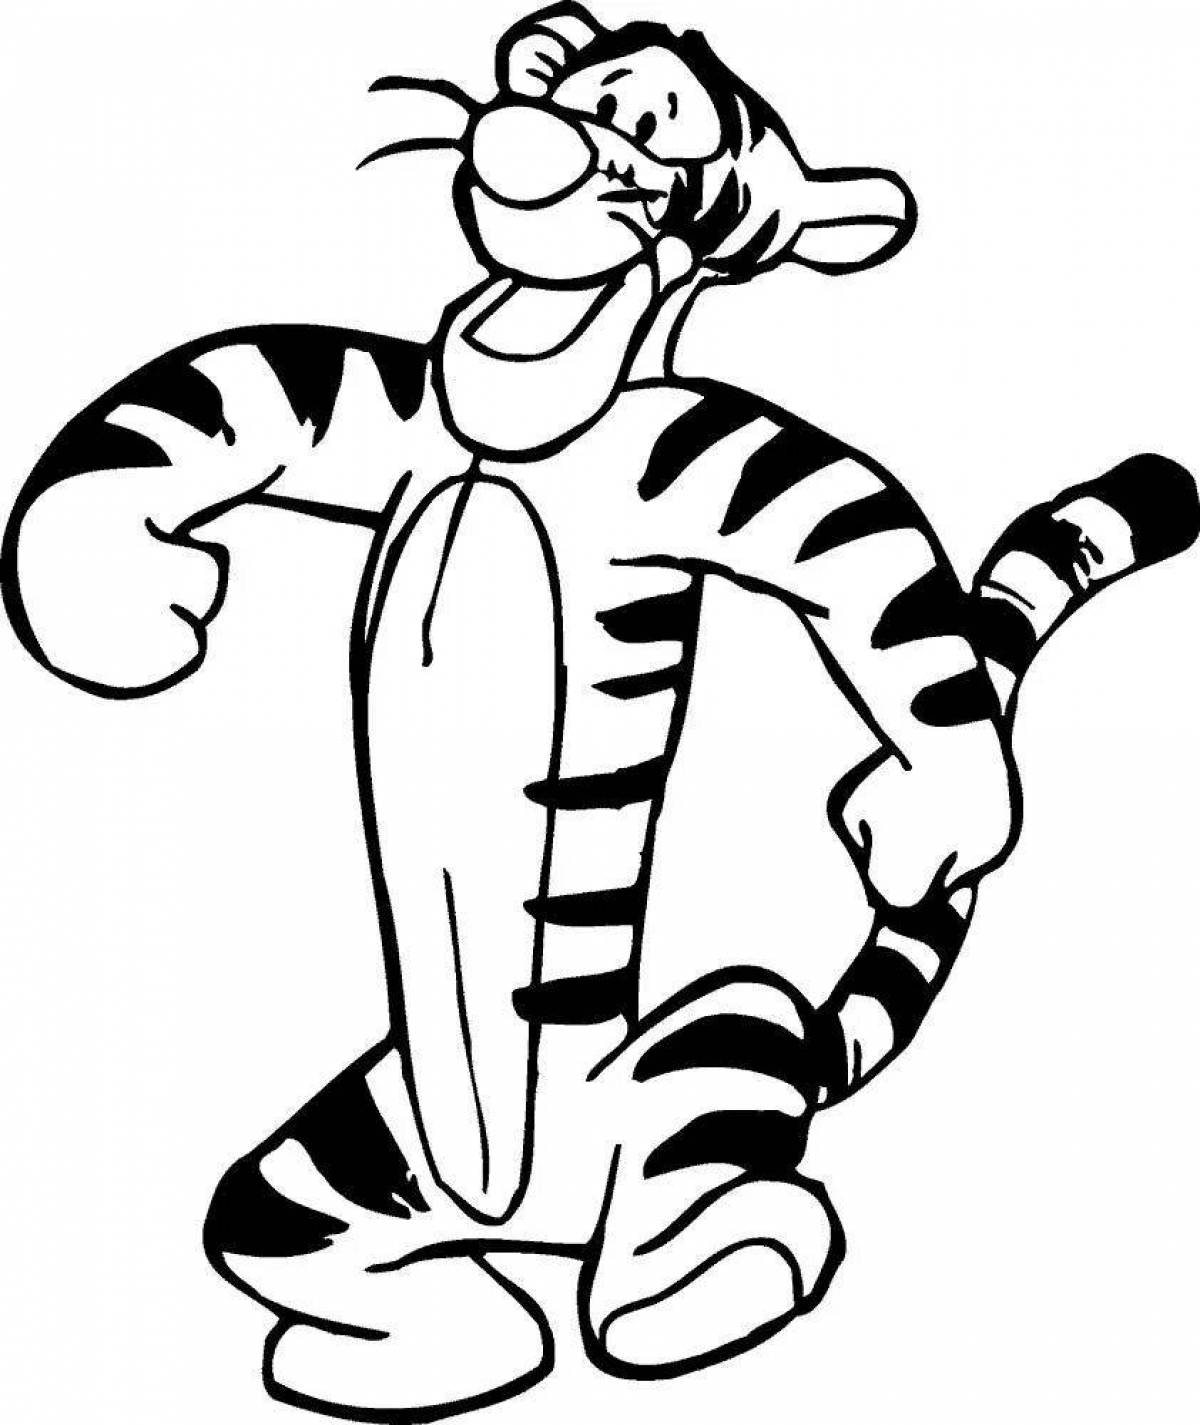 Coloring page gorgeous tigress